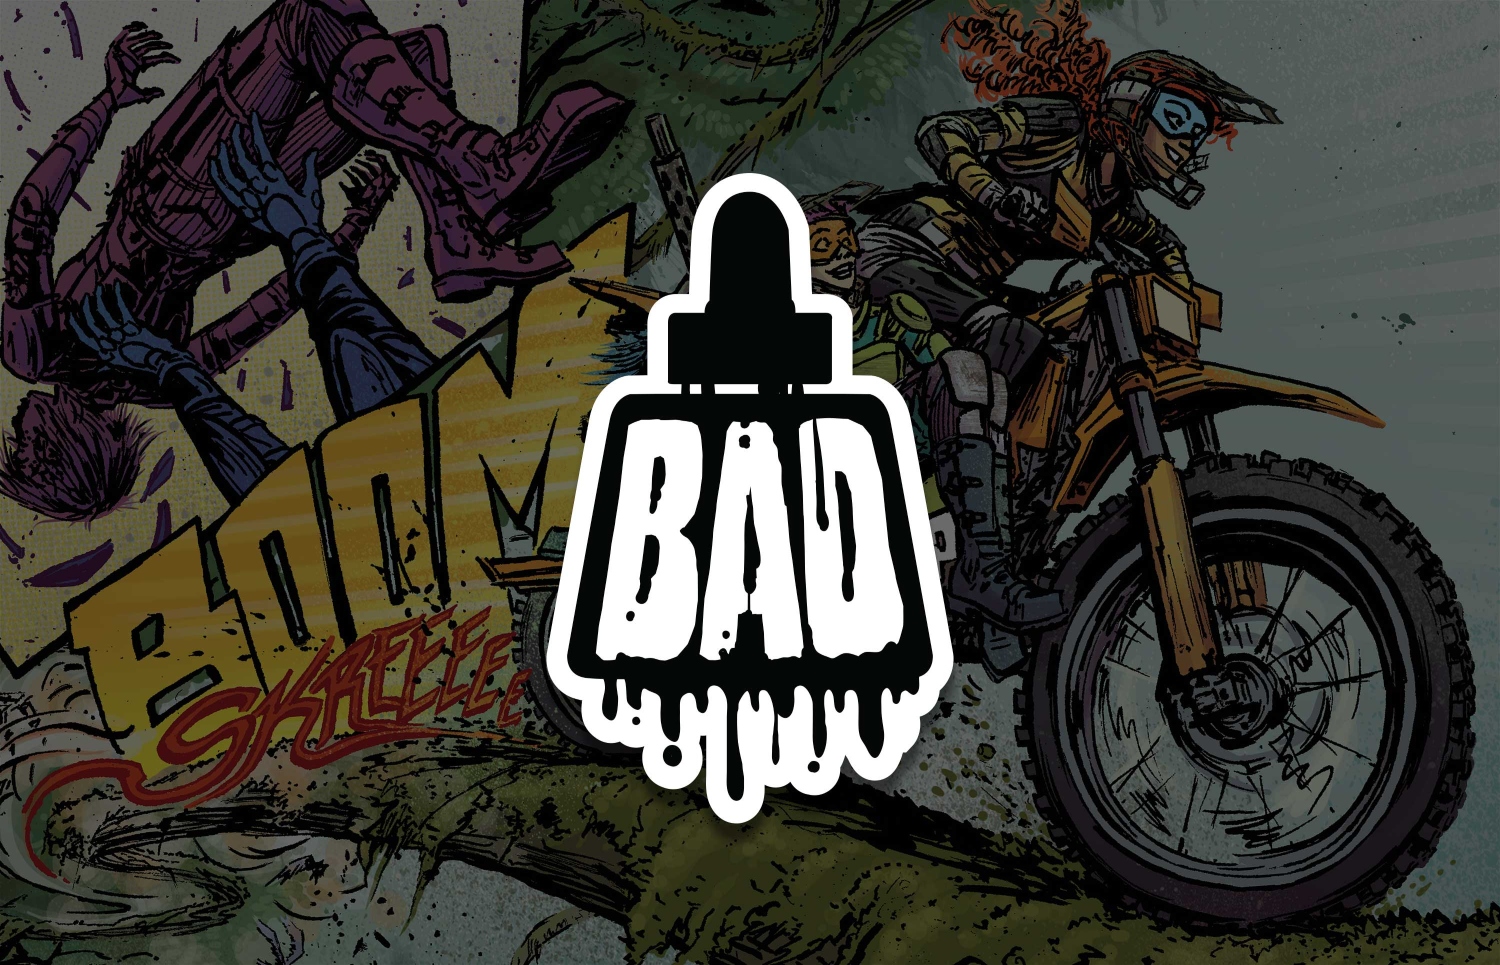 Bad Ink Studios wants to make comics weird and accessible